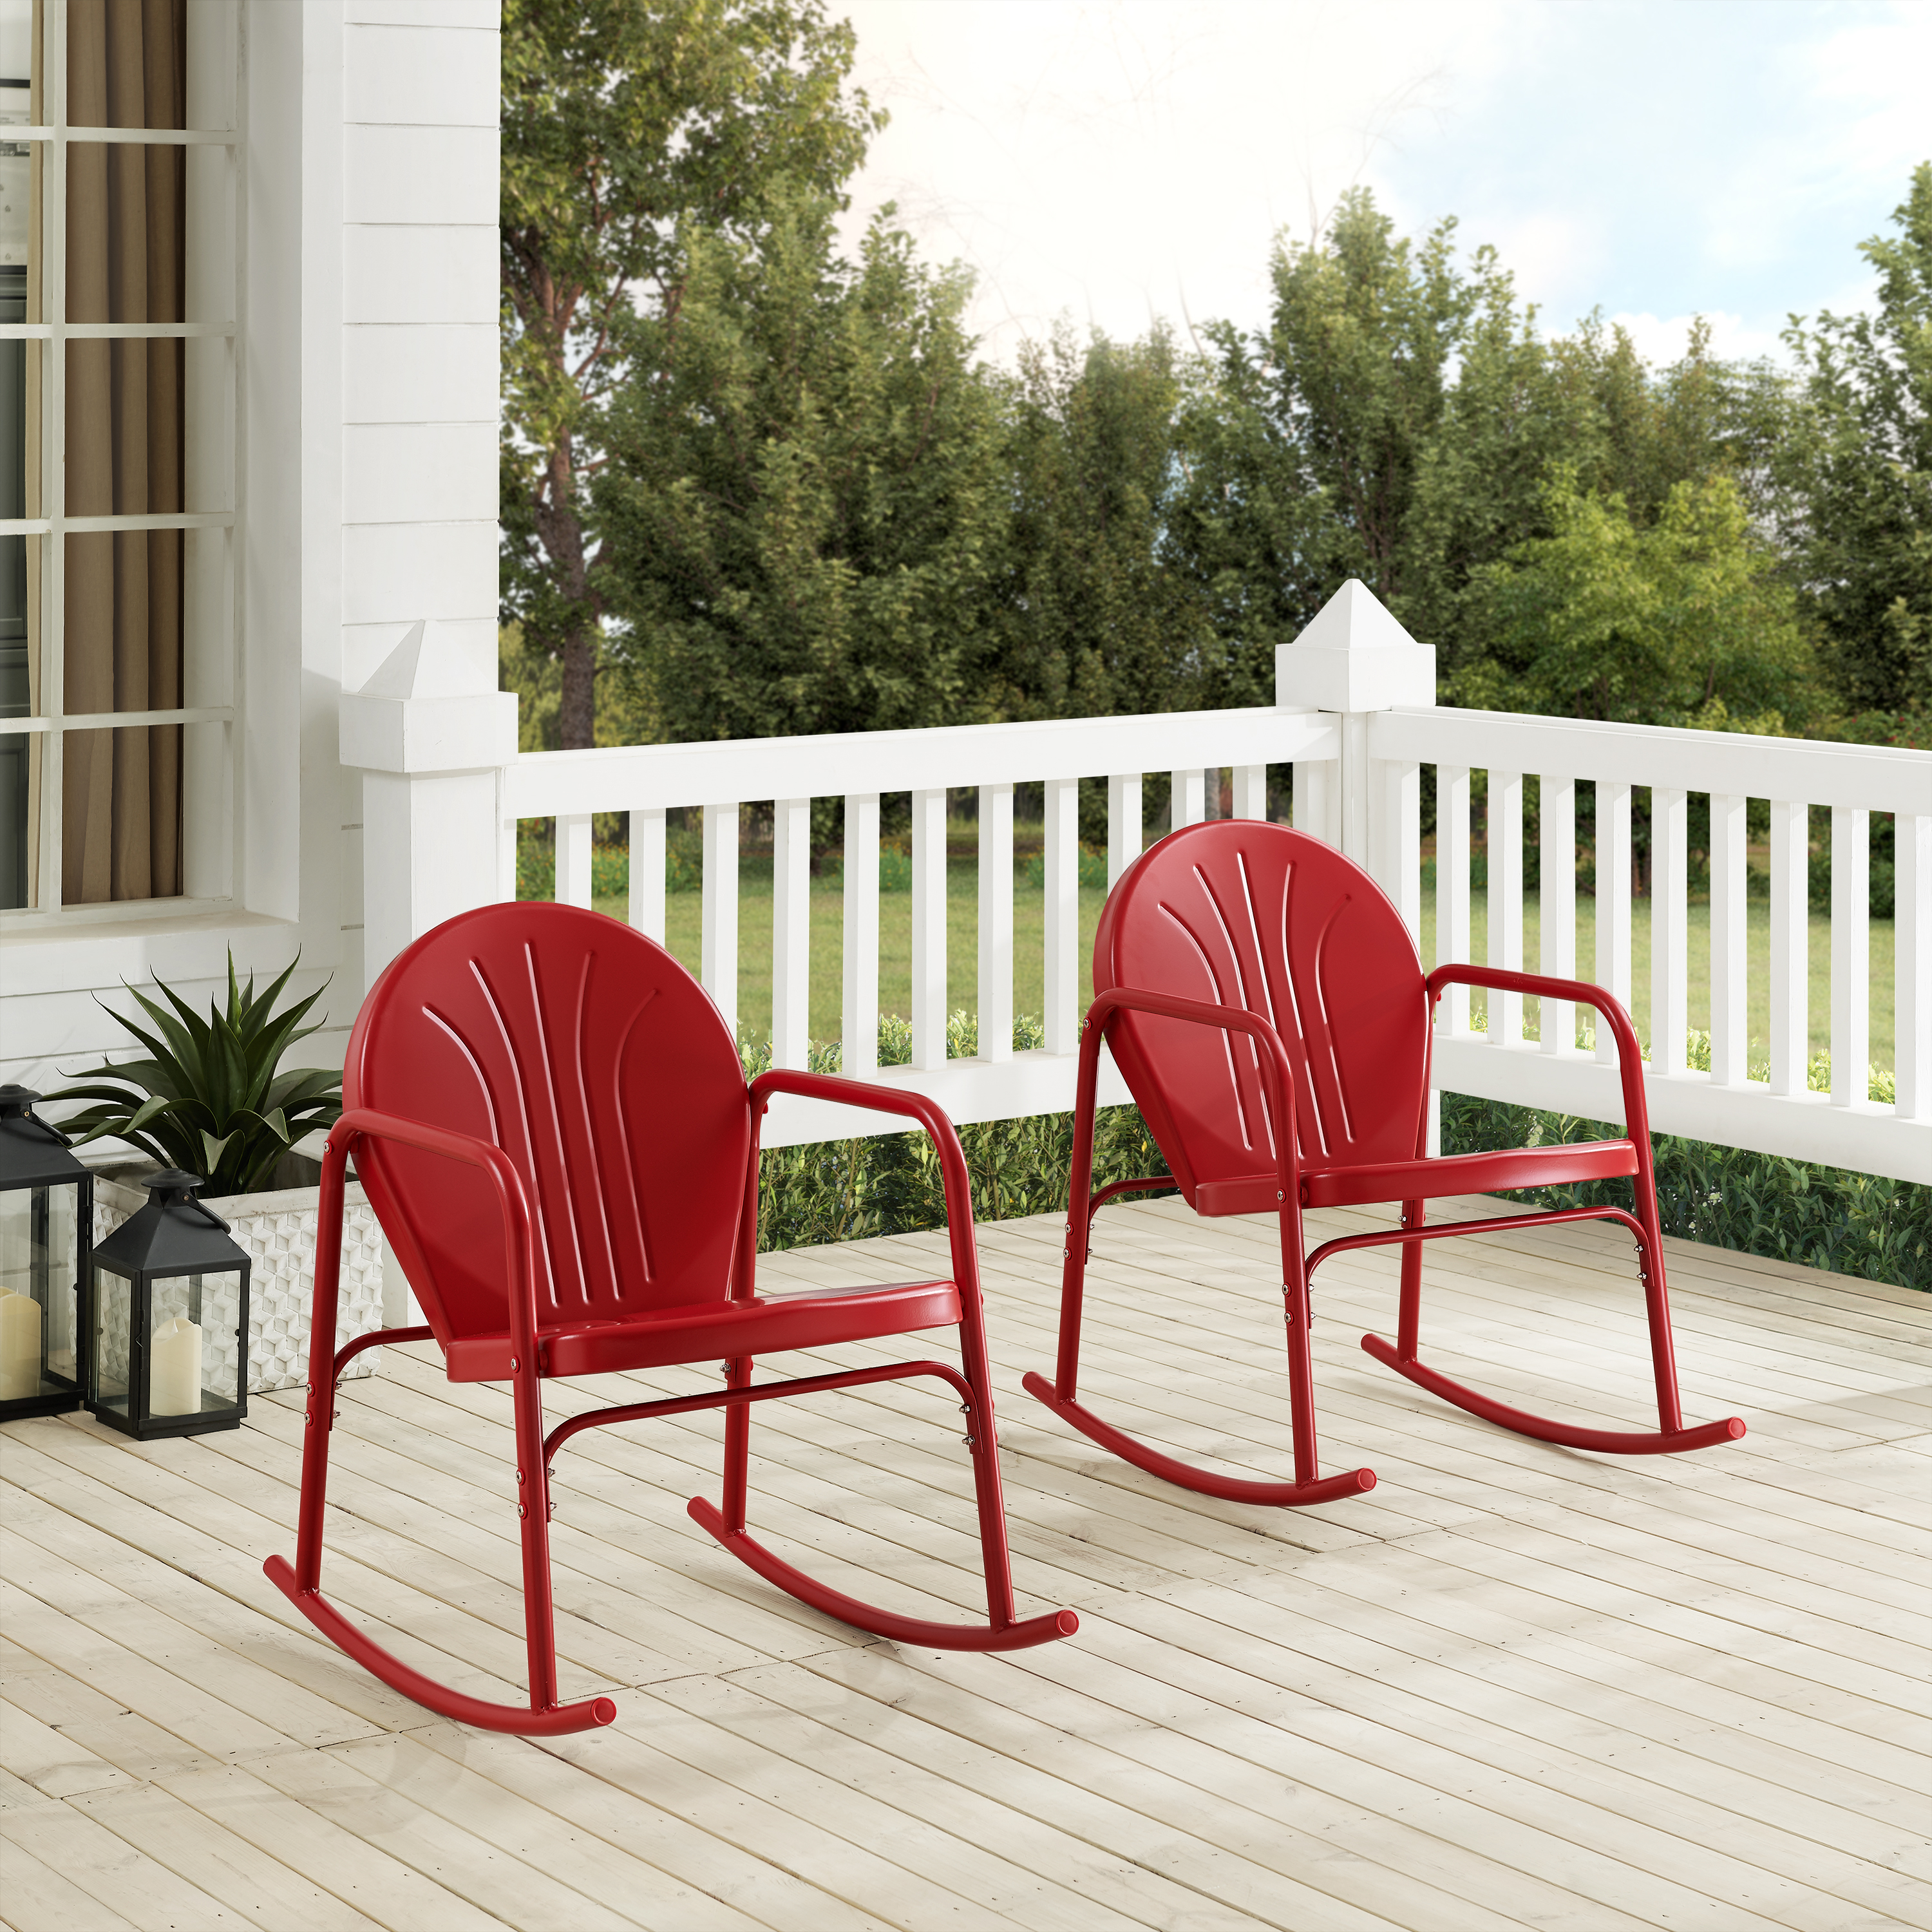 Crosley Furniture Griffith Metal Rocking Chair in Bright Red Gloss (Set of 2) - image 2 of 13